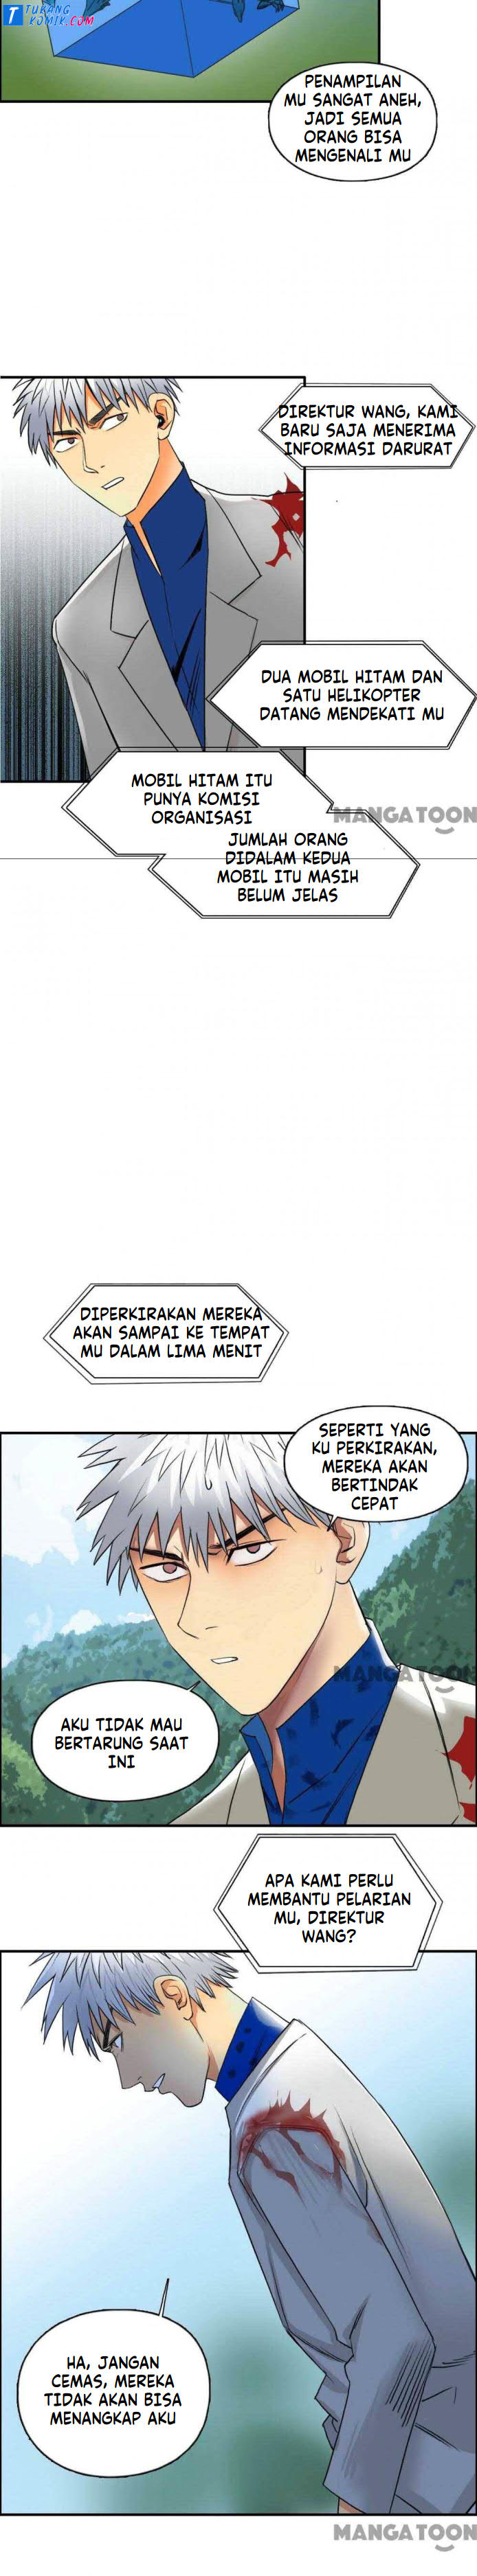 Super Cube Chapter 83